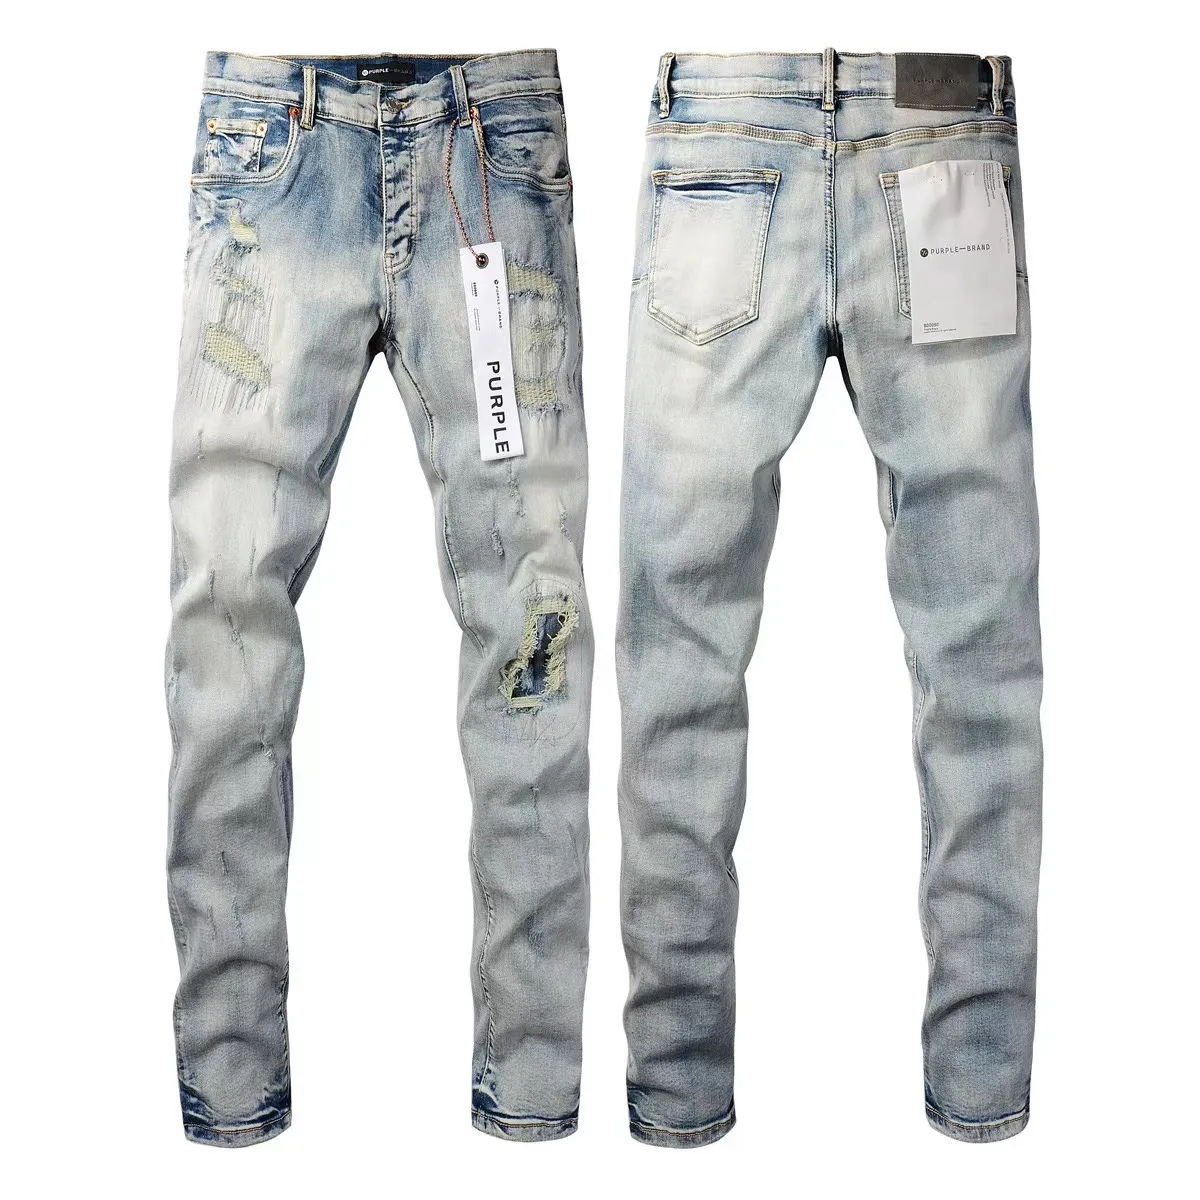 Purple Jeans Mens Designer Embrodery Quilting Ripped For Trend Brand Vintage Pant Casual Solid Classic Straight Jean For Manlig motorcykel Pant Mens Rock Revival LZ3